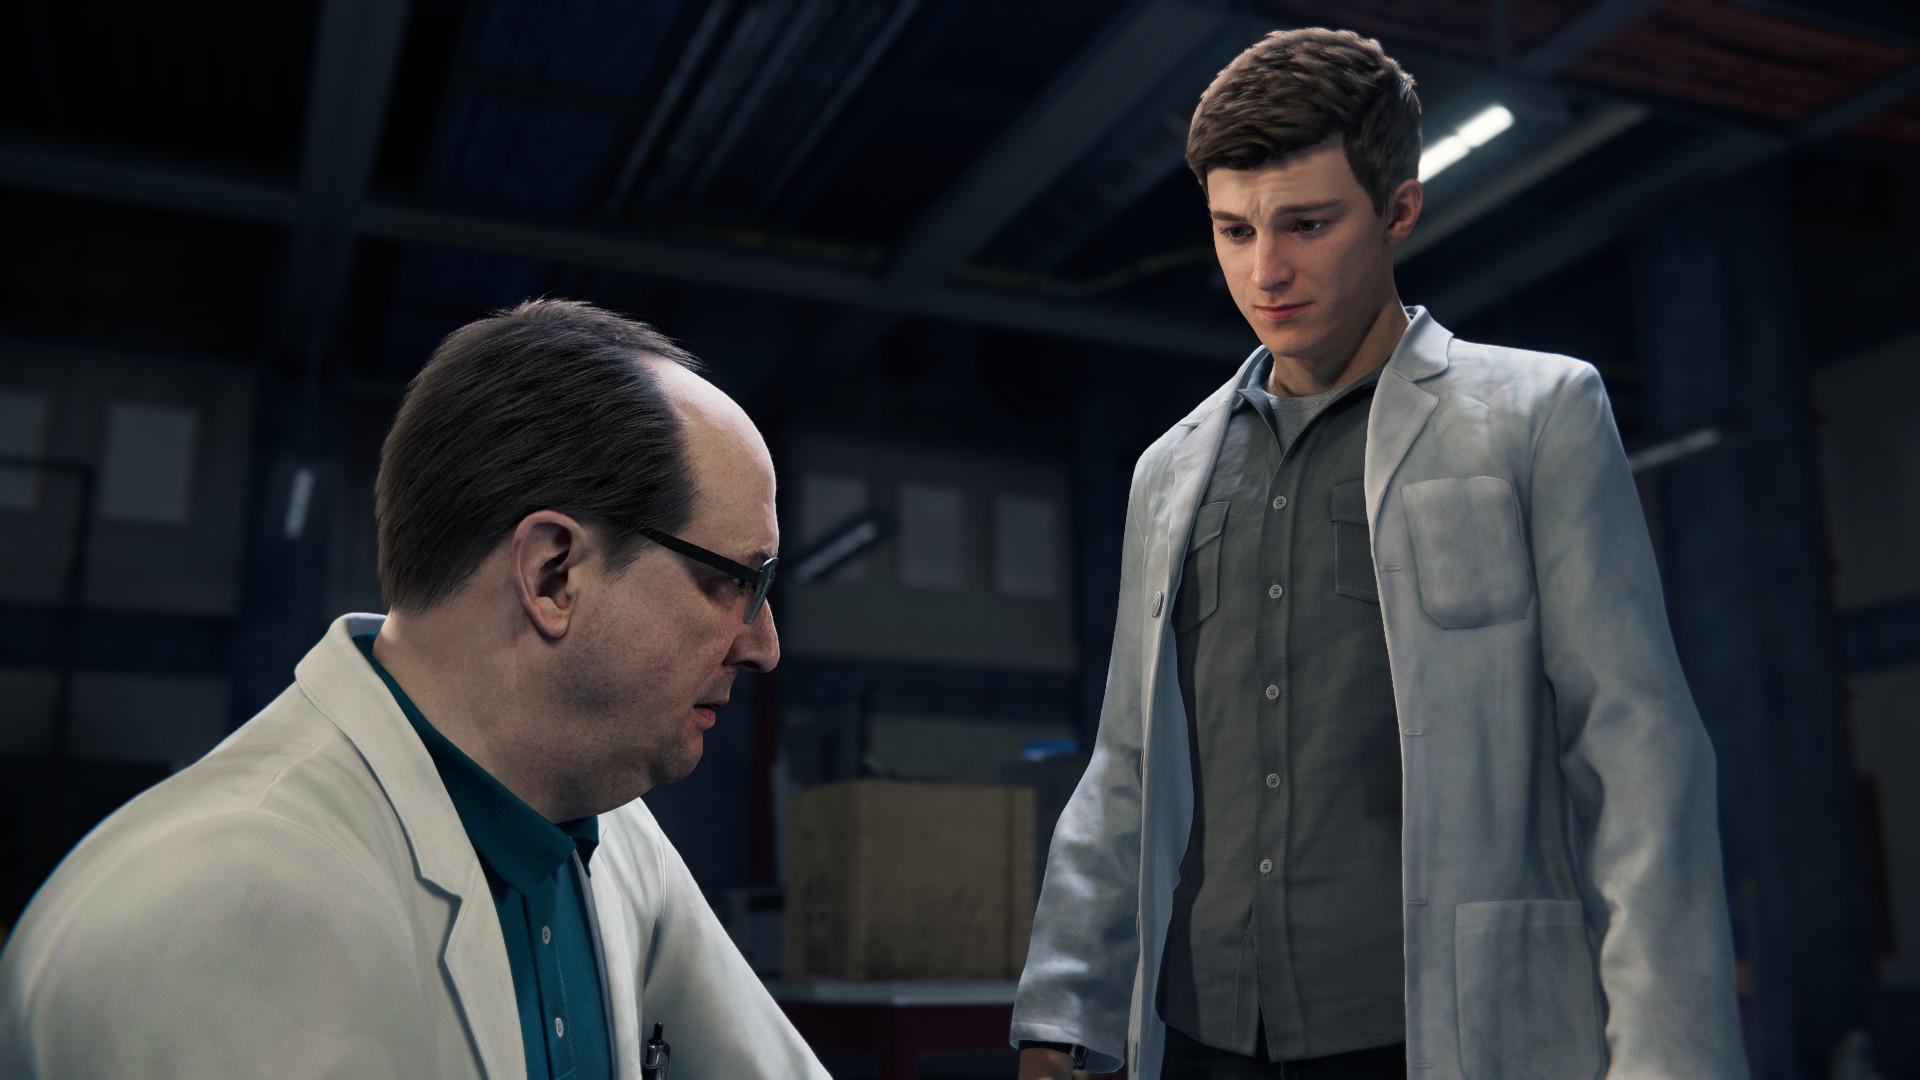 Marvel's Spider-Man Remastered PC review: Otto Octavius (left) looks on as Peter Parker (right) gazes down at him folornly